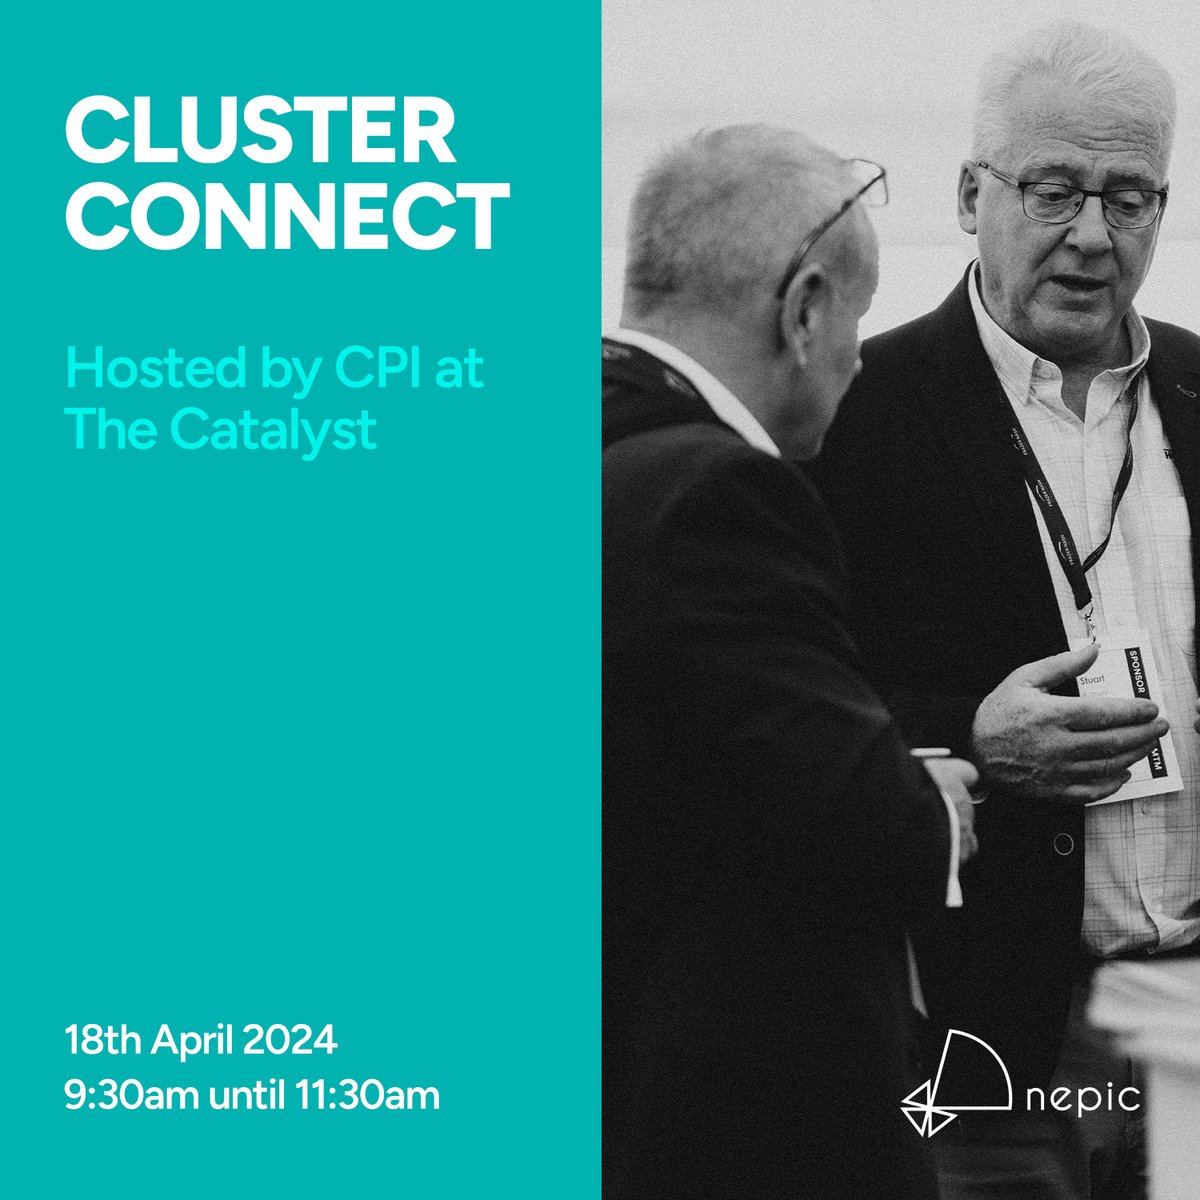 Have you registered for Thursday's Cluster Connect at The Catalyst, @newcastlehelix hosted by @ukCPI? 📆 Join us from 9:30 - 11:30 for a morning of #networking and hear from CPI, @WadeConstMgmt and iCOR Systems Ltd. Book your FREE place 👉 eventbrite.co.uk/e/cluster-conn…